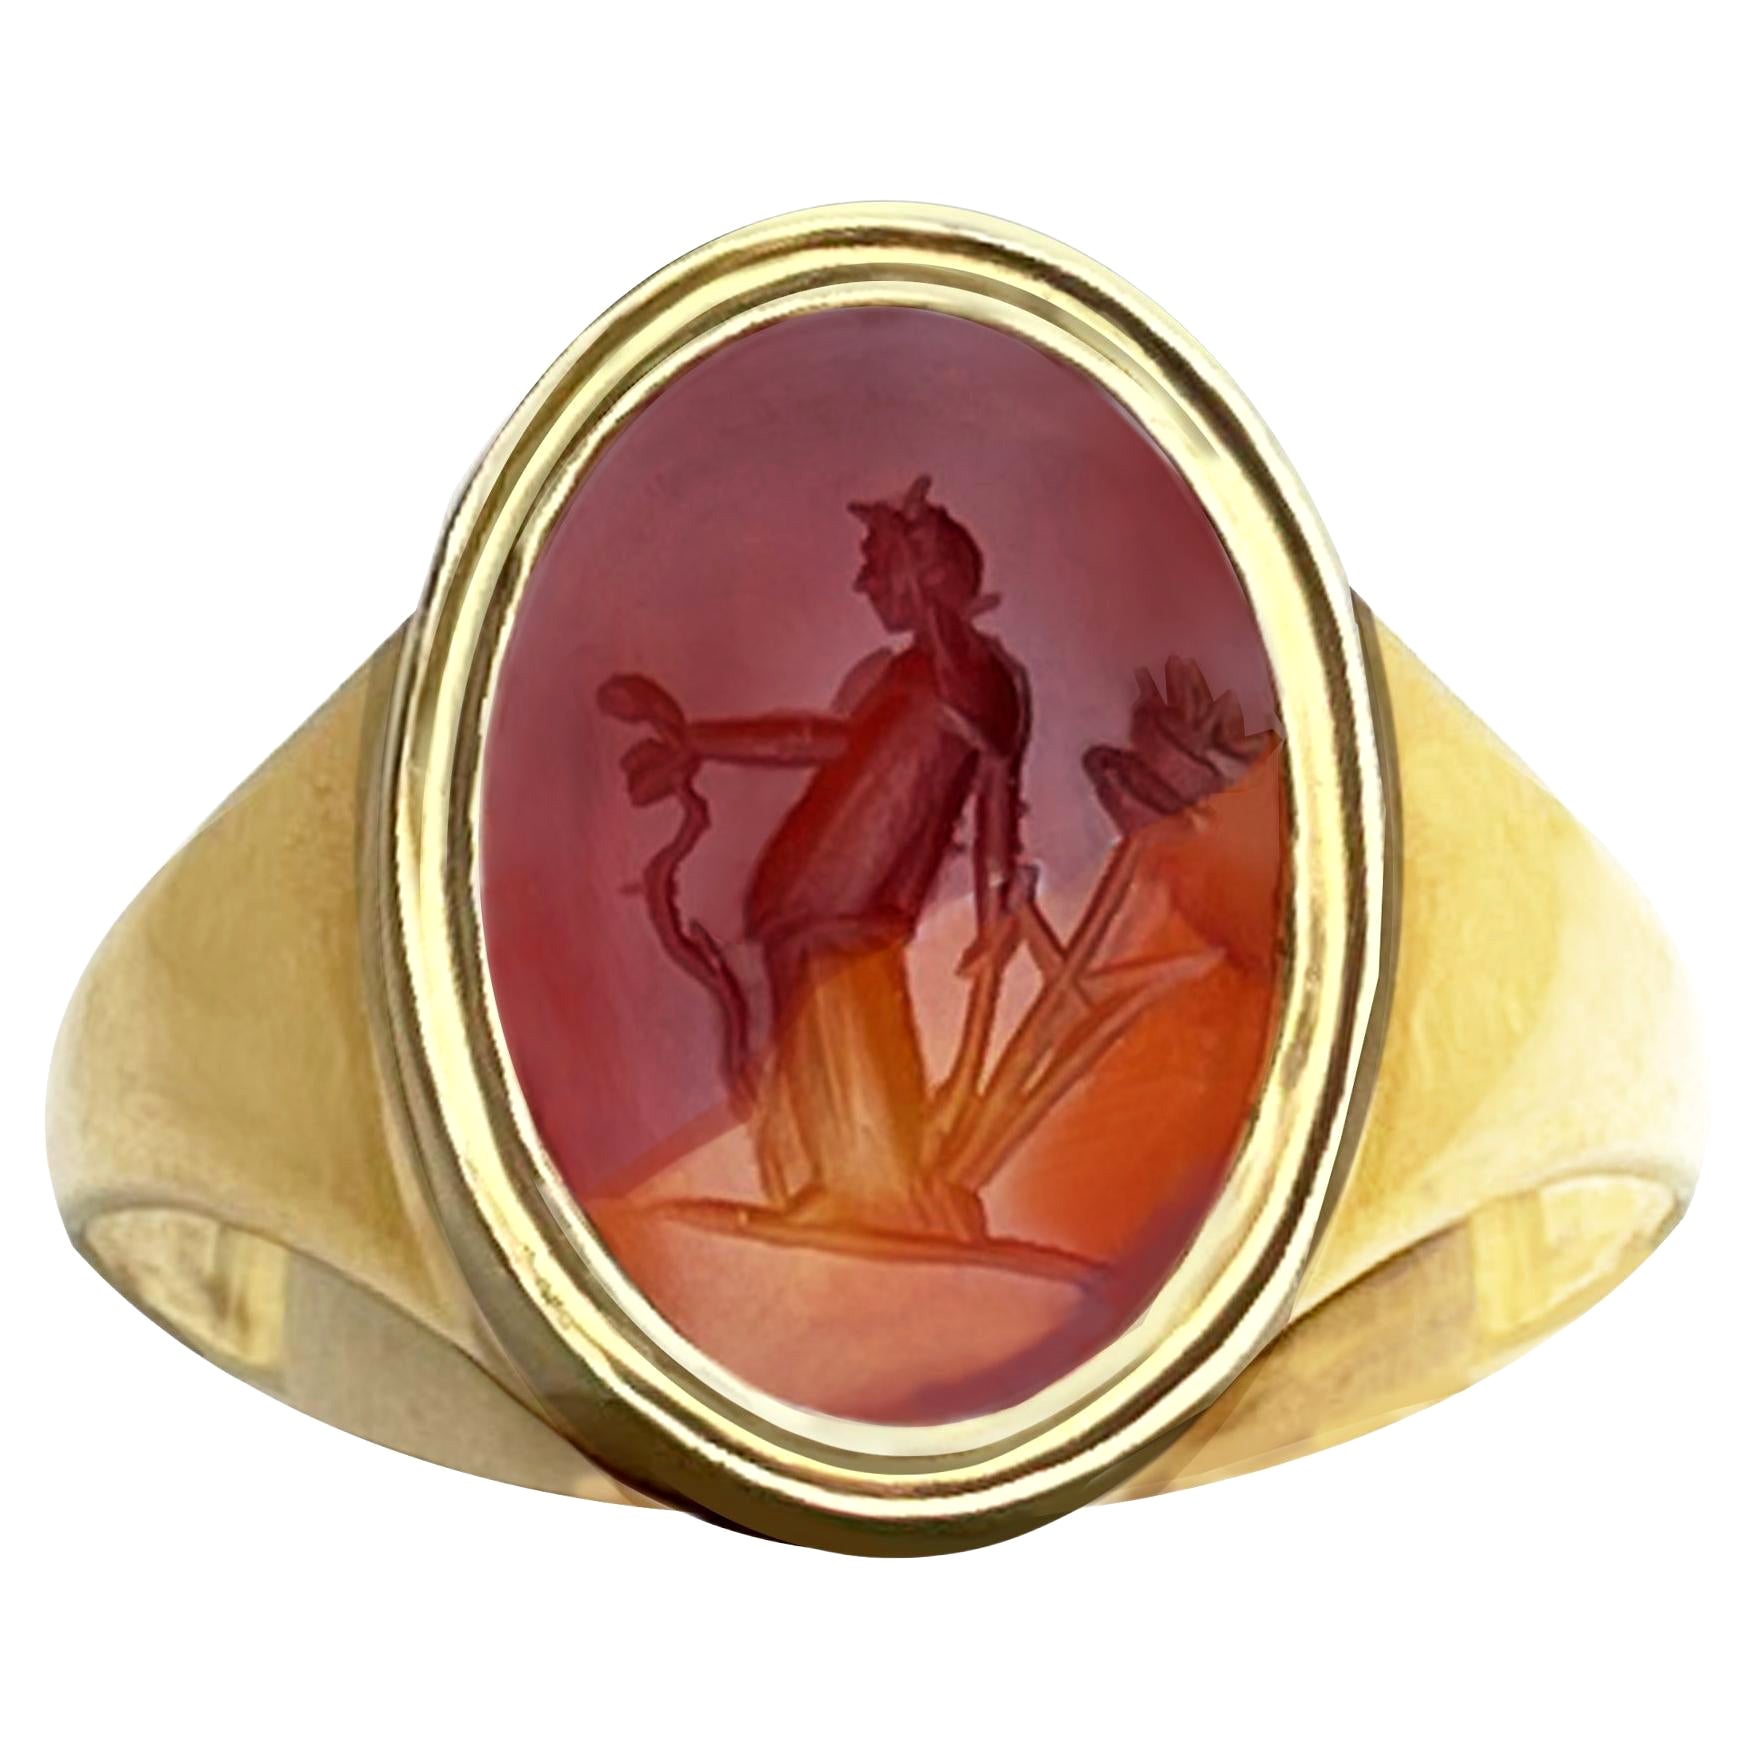 Vesta Roman Carnelian Intaglio 2nd-3rd Cent.AD 18 Kt Gold Ring Made in Italy